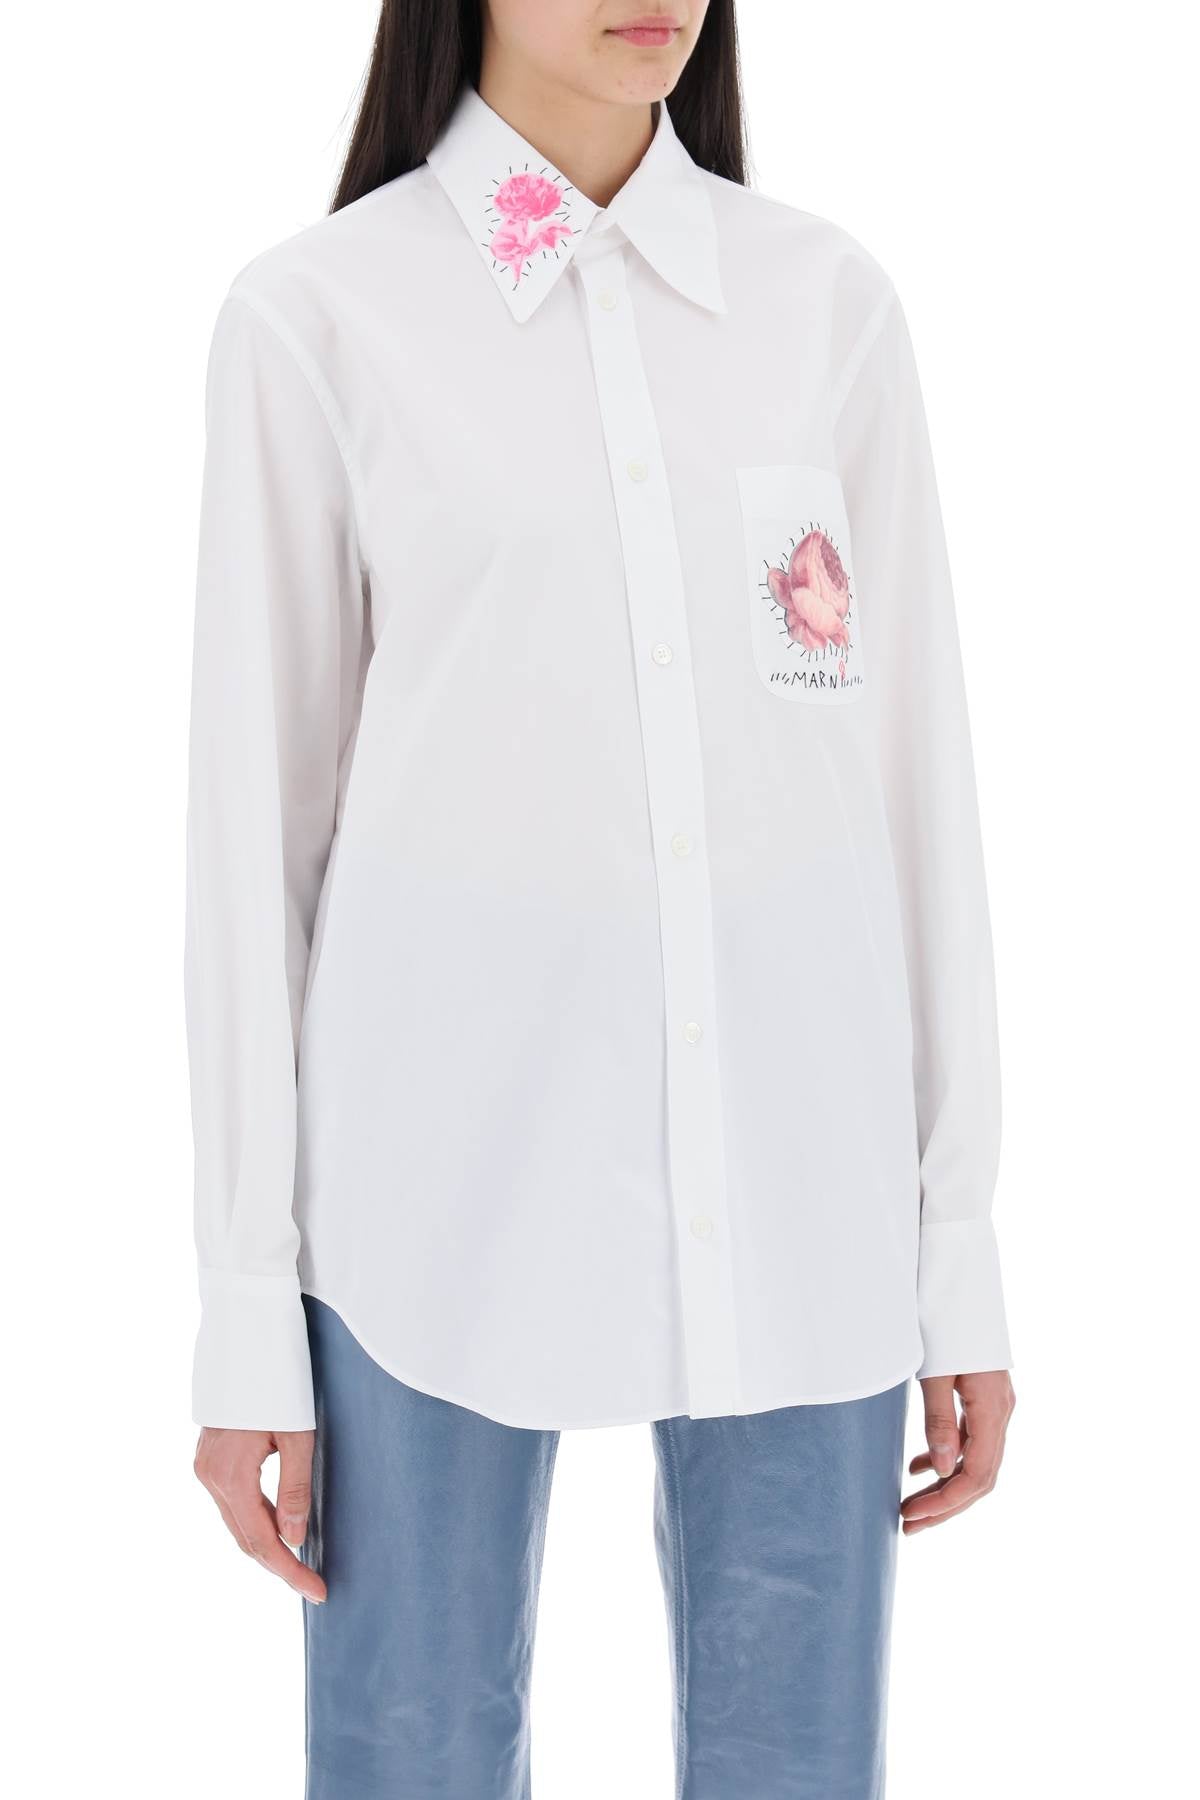 "shirt with flower print patch and embroidered logo-1